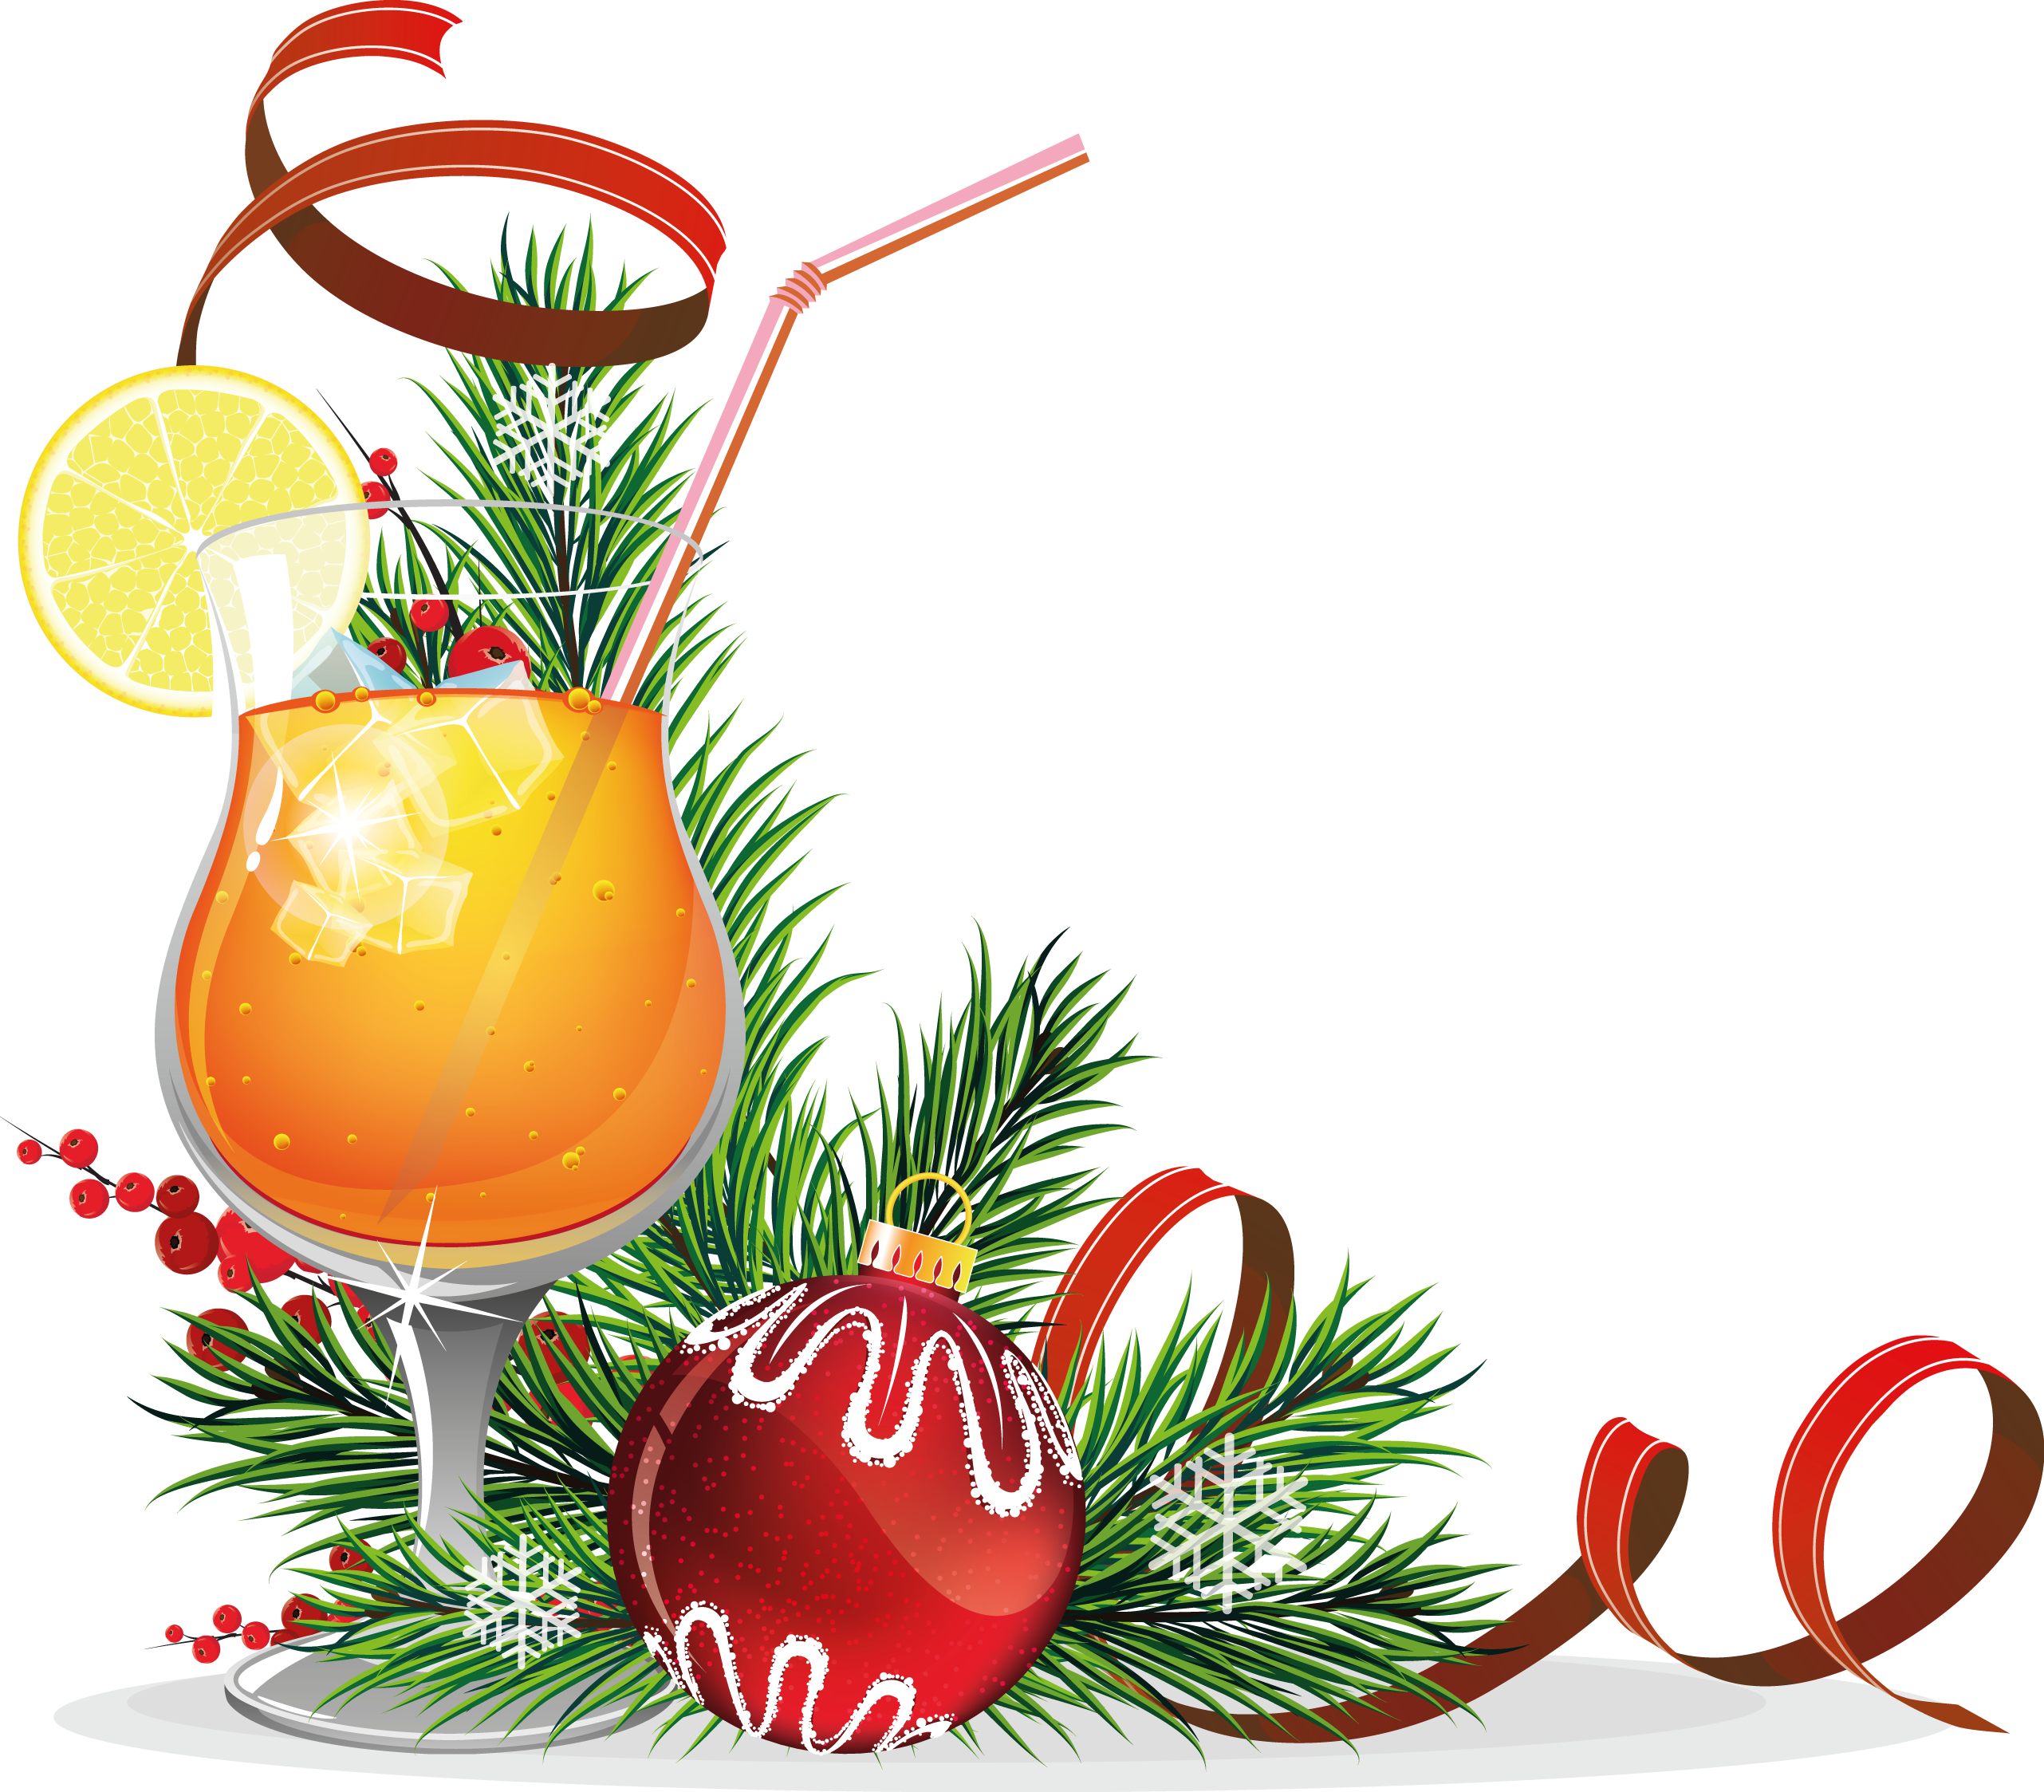 Download and share clipart about Christmas Corners - Cocktail, Find more hi...